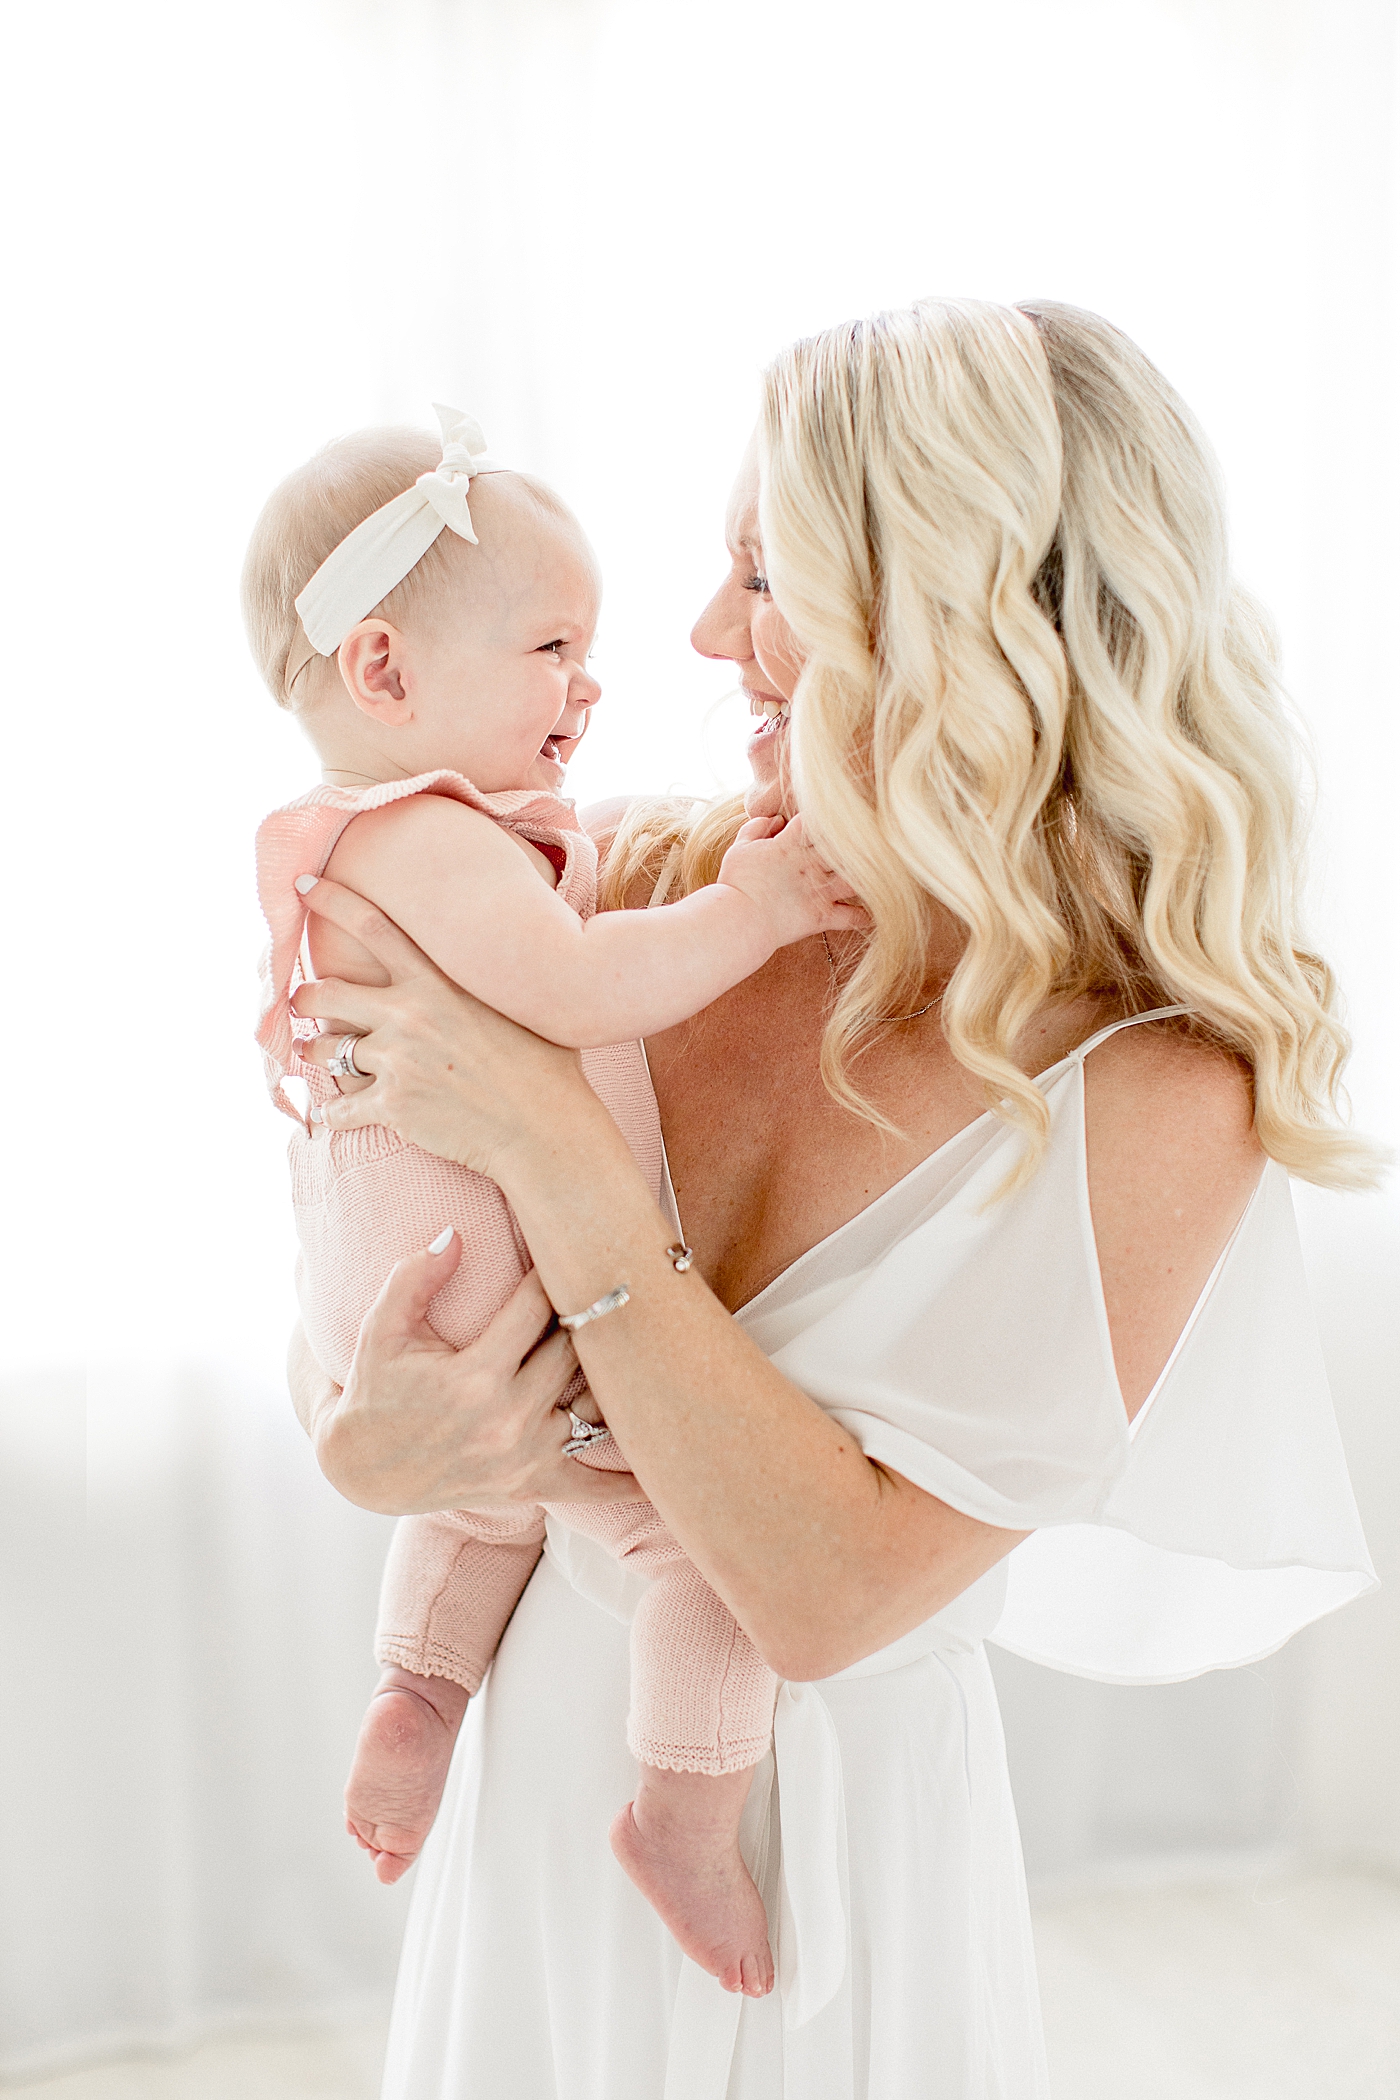 Mom and baby girl looking at each other at nine months old. Photo by Brittany Elise Photography.